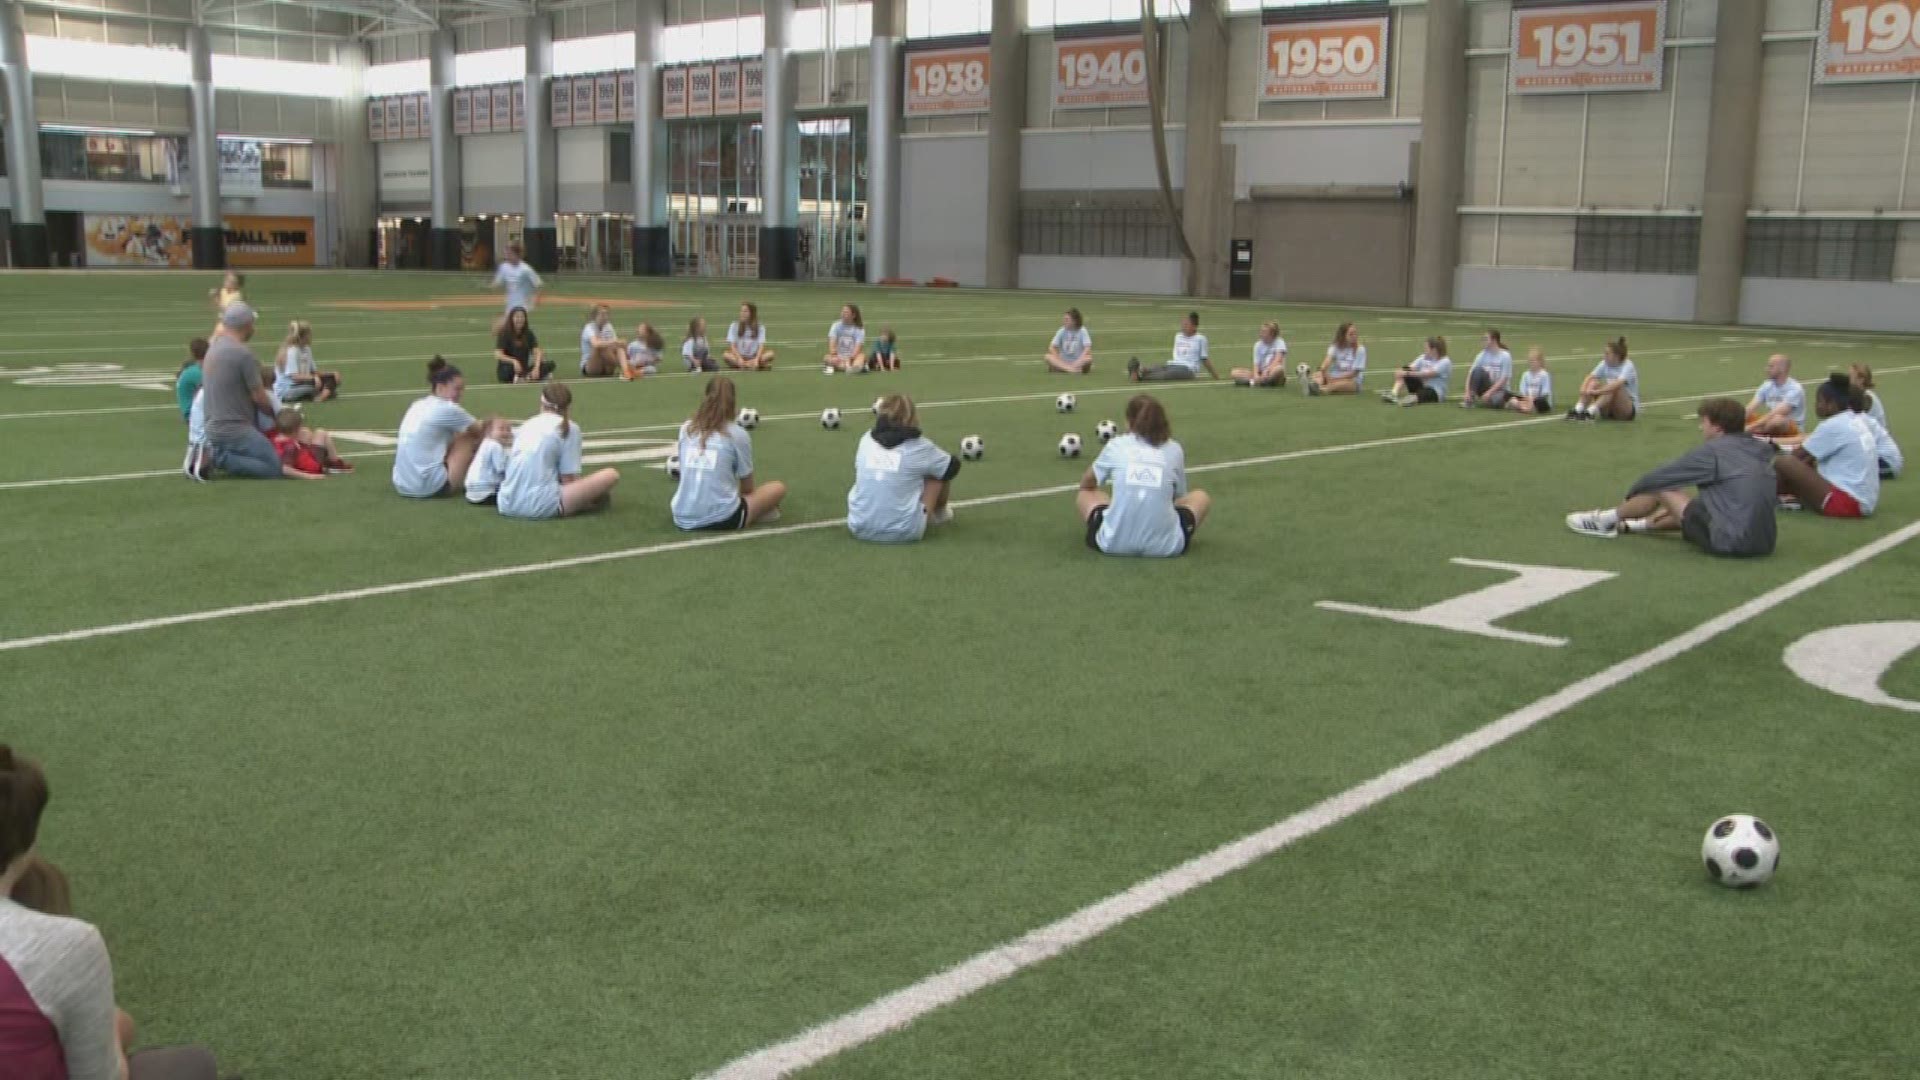 The Lady Vols soccer team is spreading the message that anything is possible on Saturday.